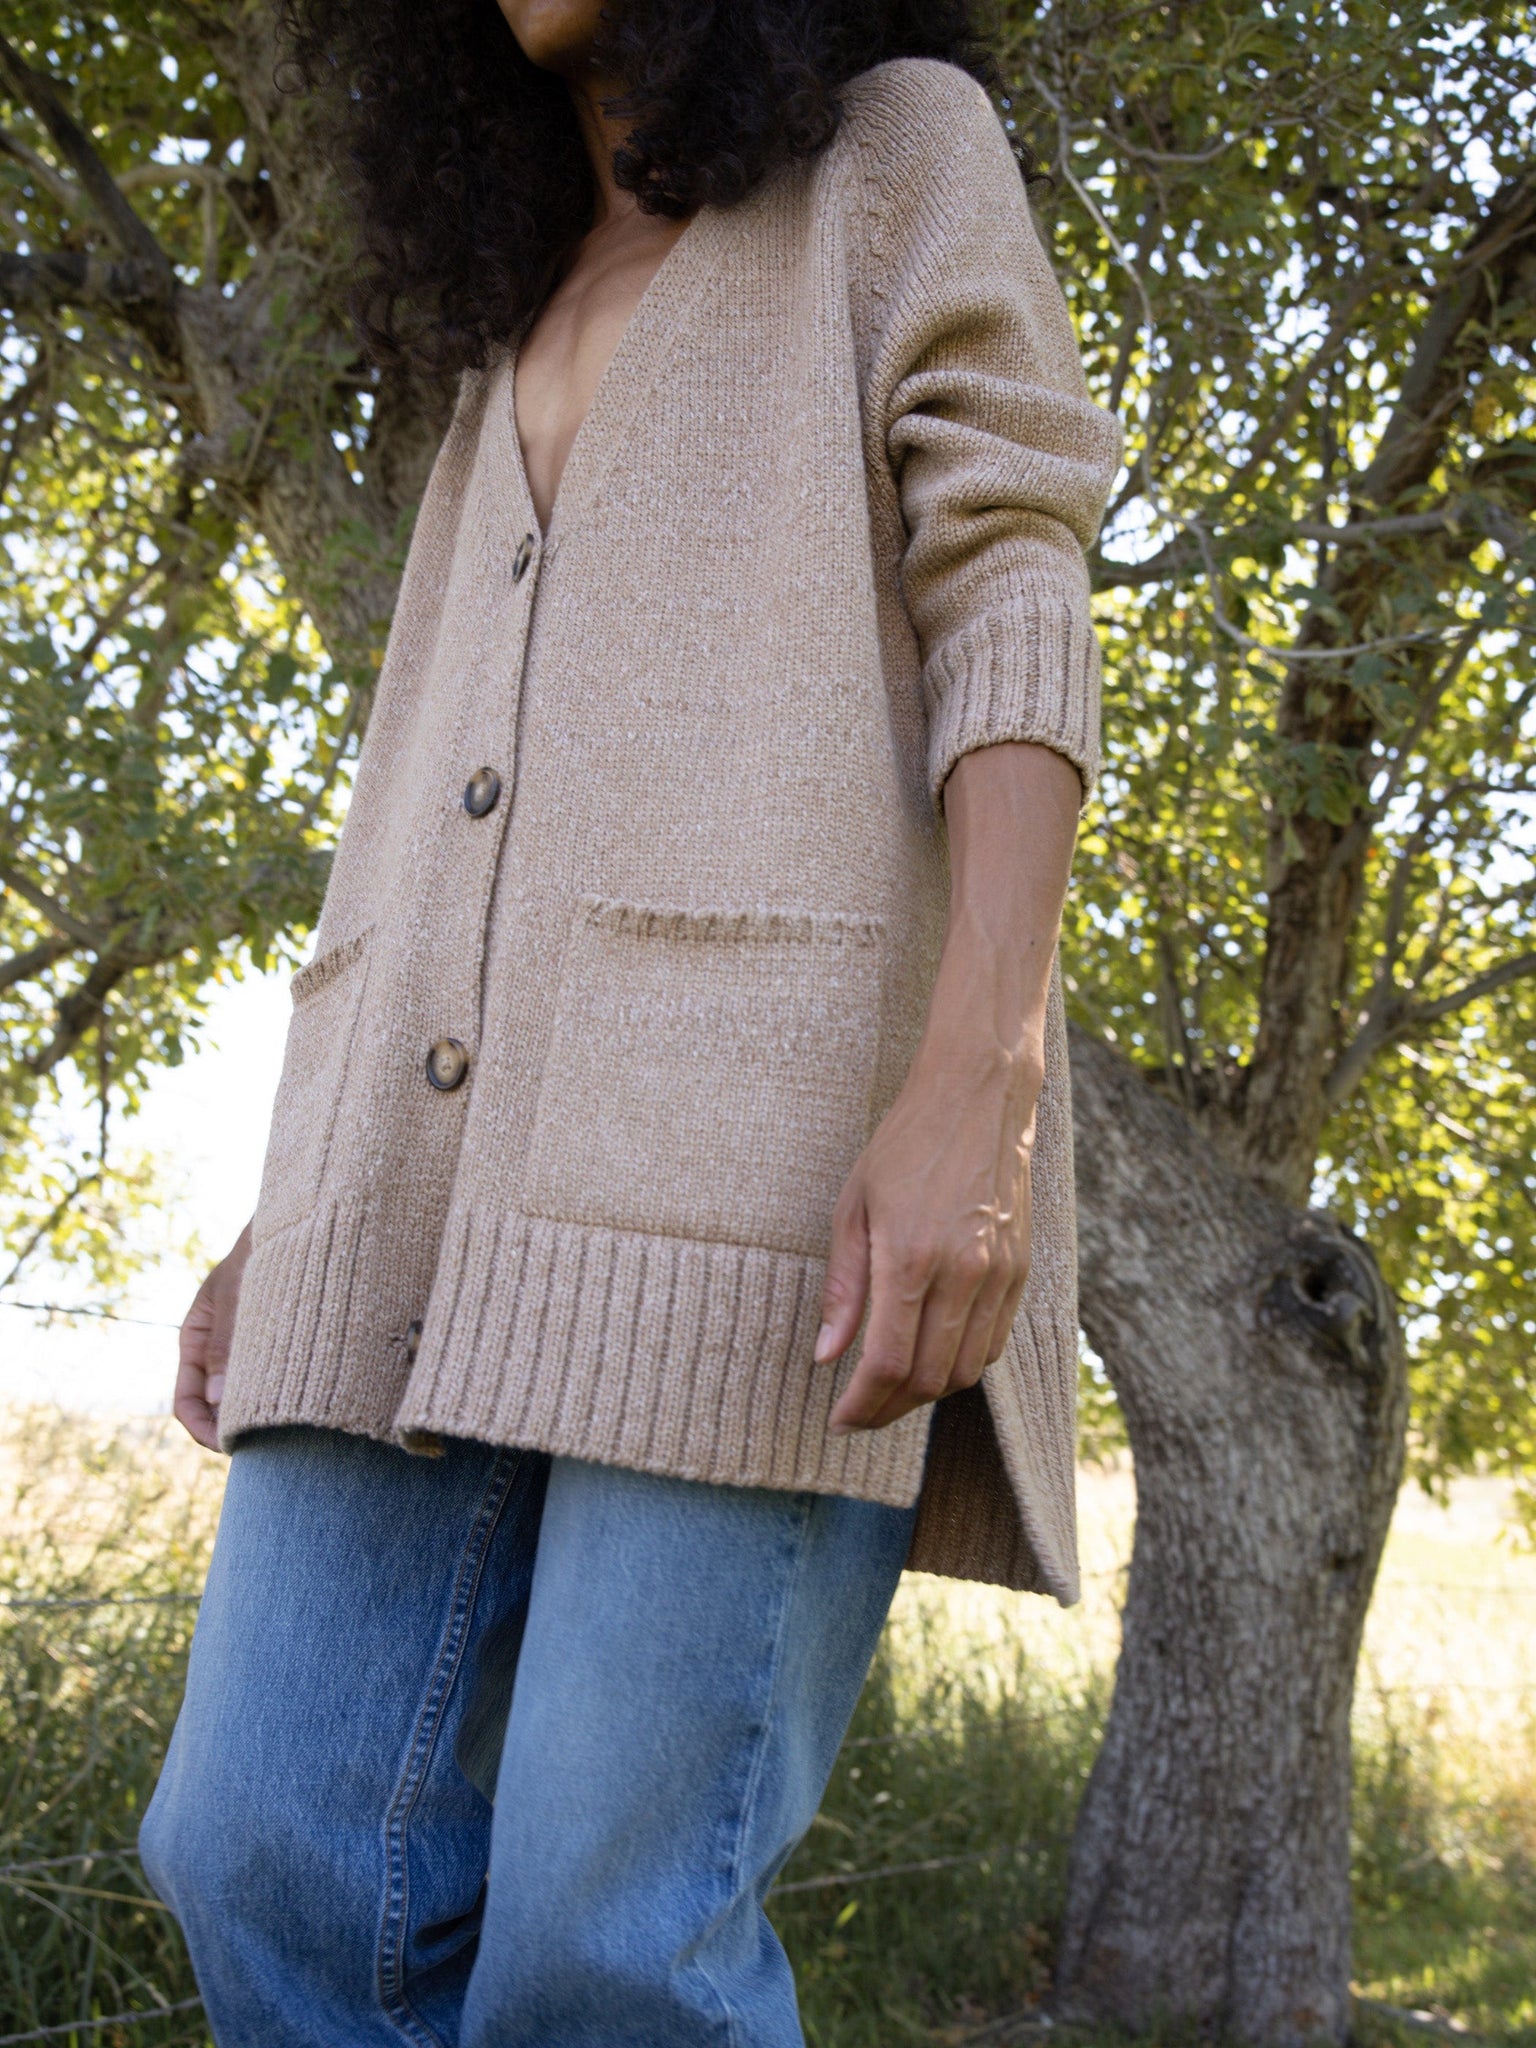 A woman wearing jeans and a Valley Cardigan - Caramel.